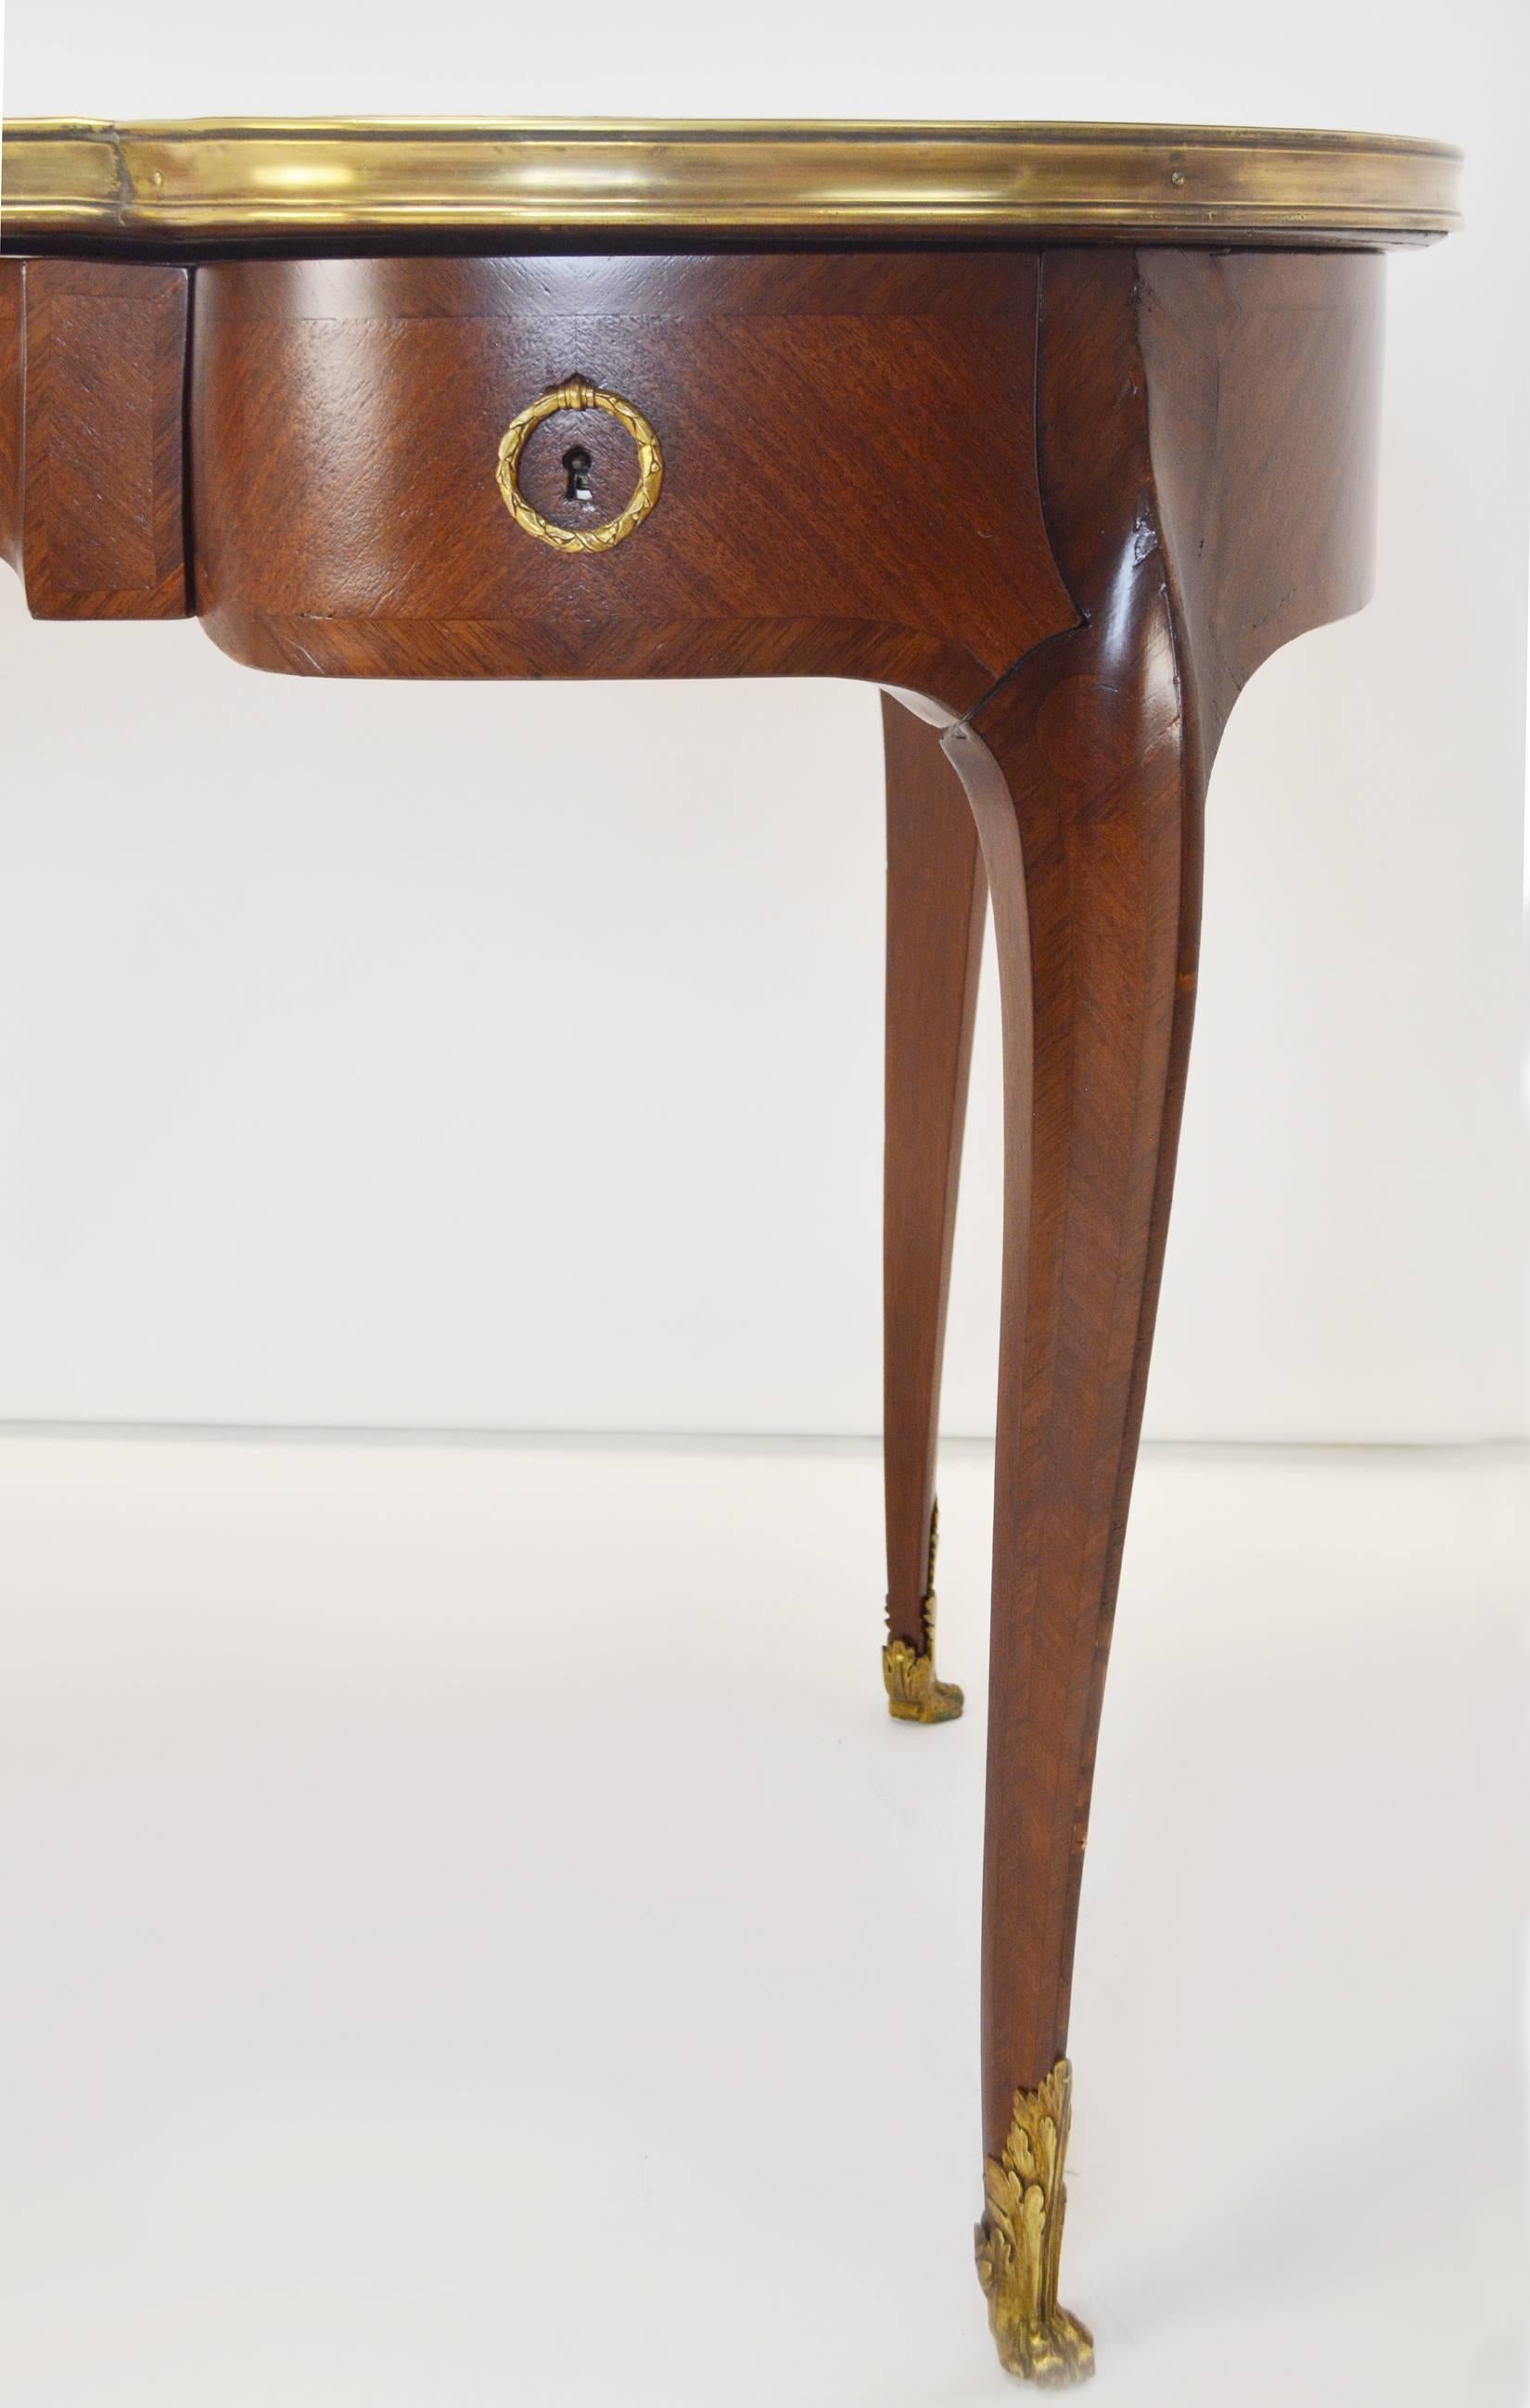 20th Century French Louis XV Style Kidney-Shaped Satinwood Desk